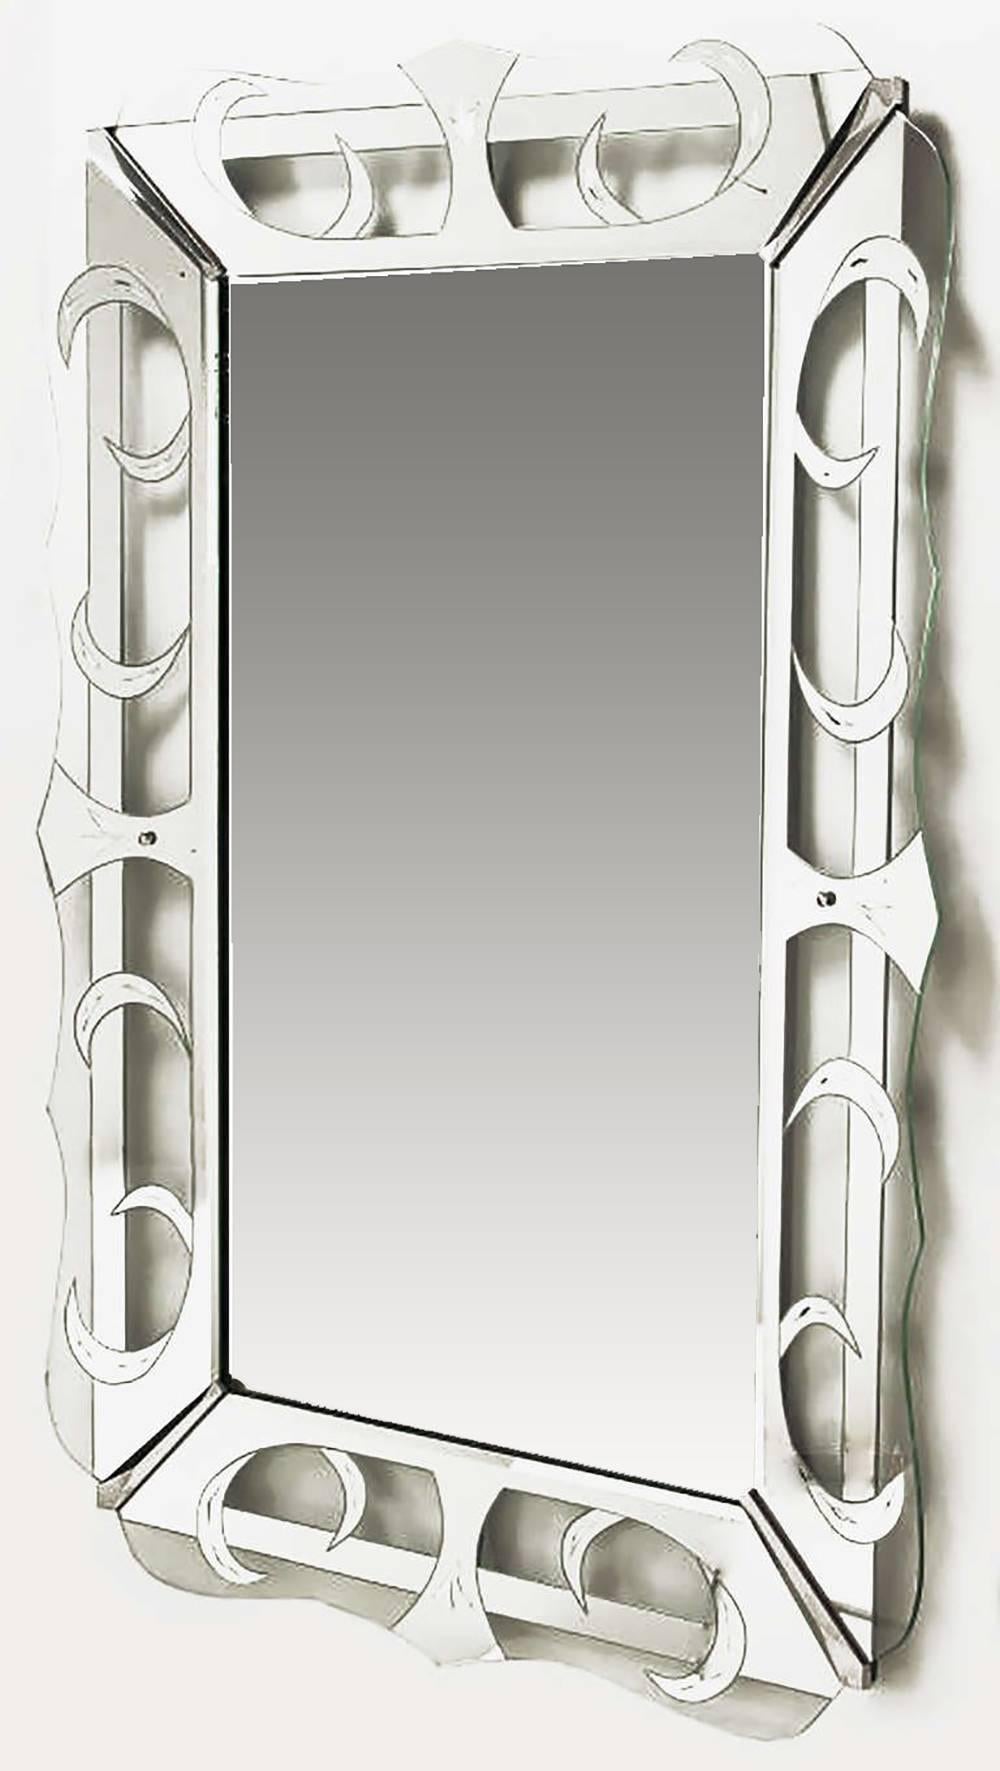 Very large Art Deco Mirror framed in glass which has been wheel cut etched and silver patterned in crescents and open trapezoids. Scalloped edge glass frame with metal bracketed corners. Mounted on a black lacquered wood backing.
Can be hung